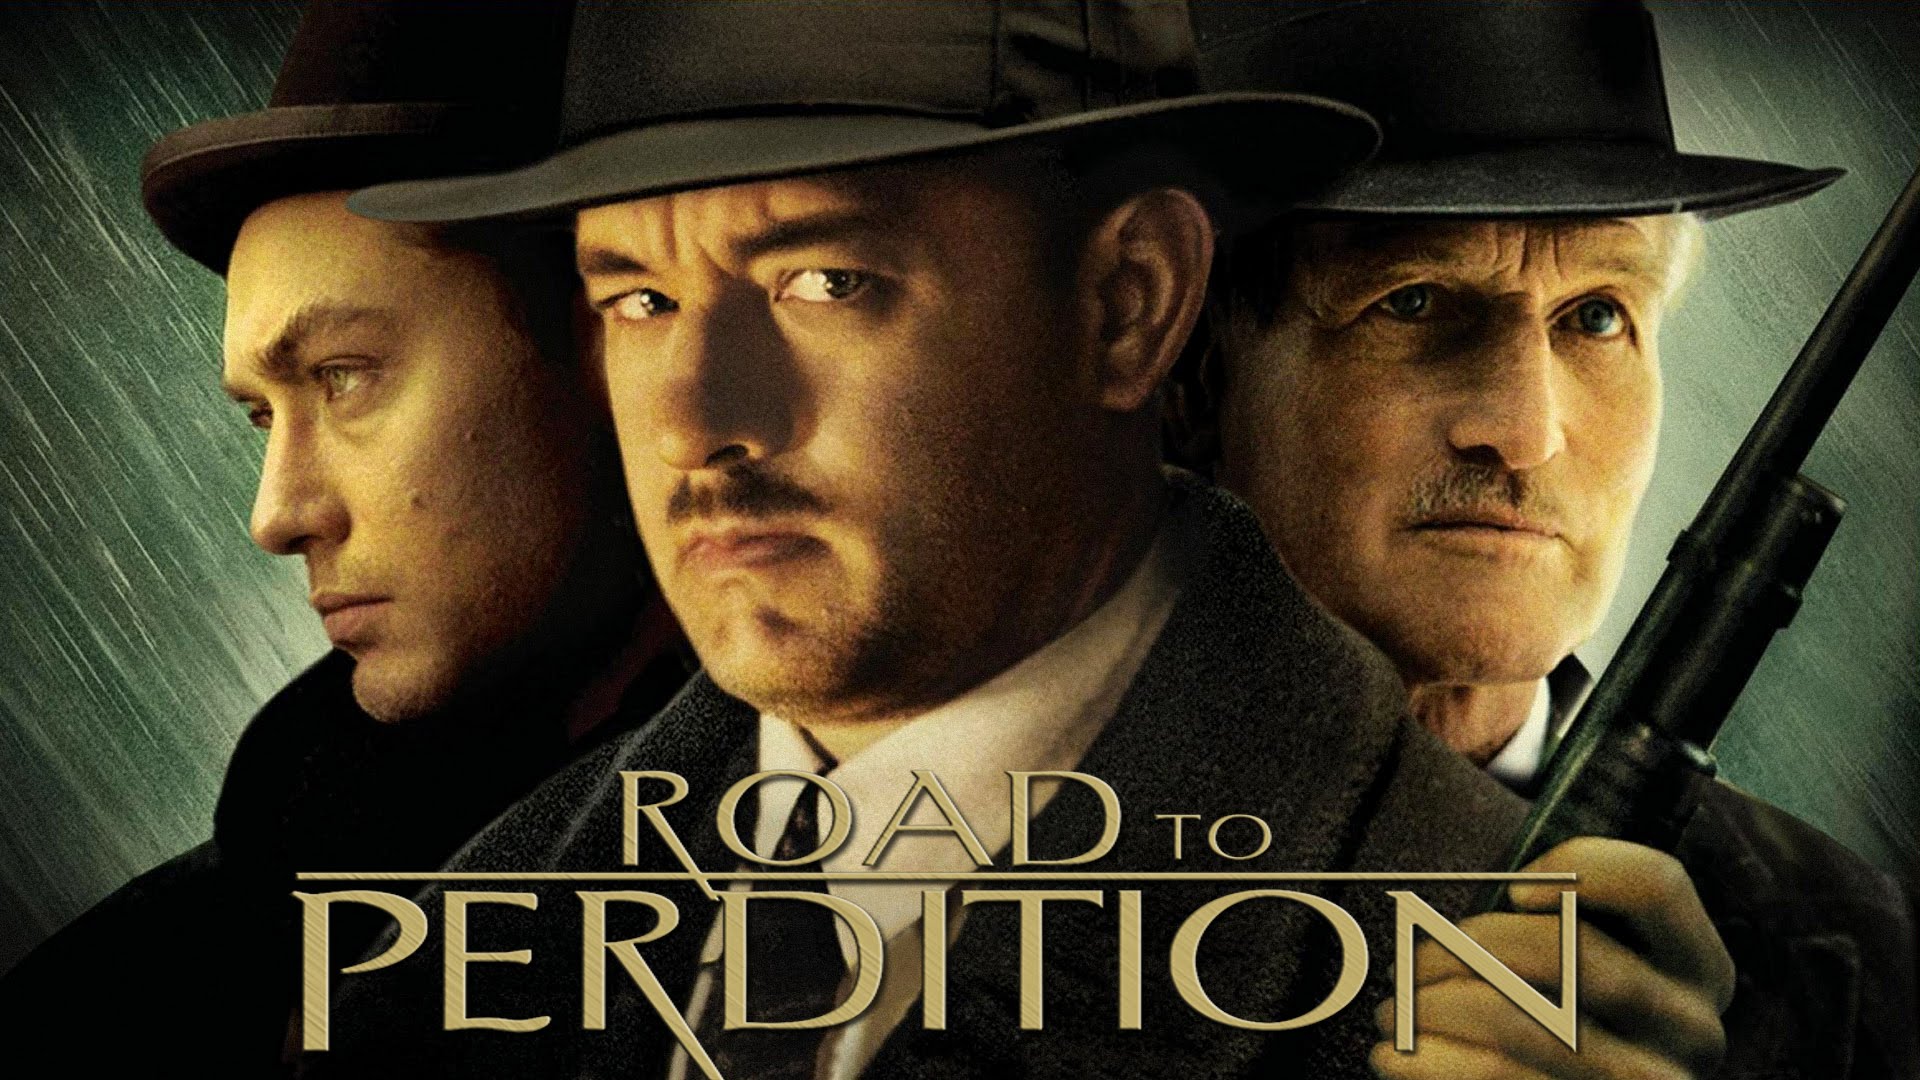 Road To Perdition wallpaper, Movie, HQ Road To Perdition pictureK Wallpaper 2019